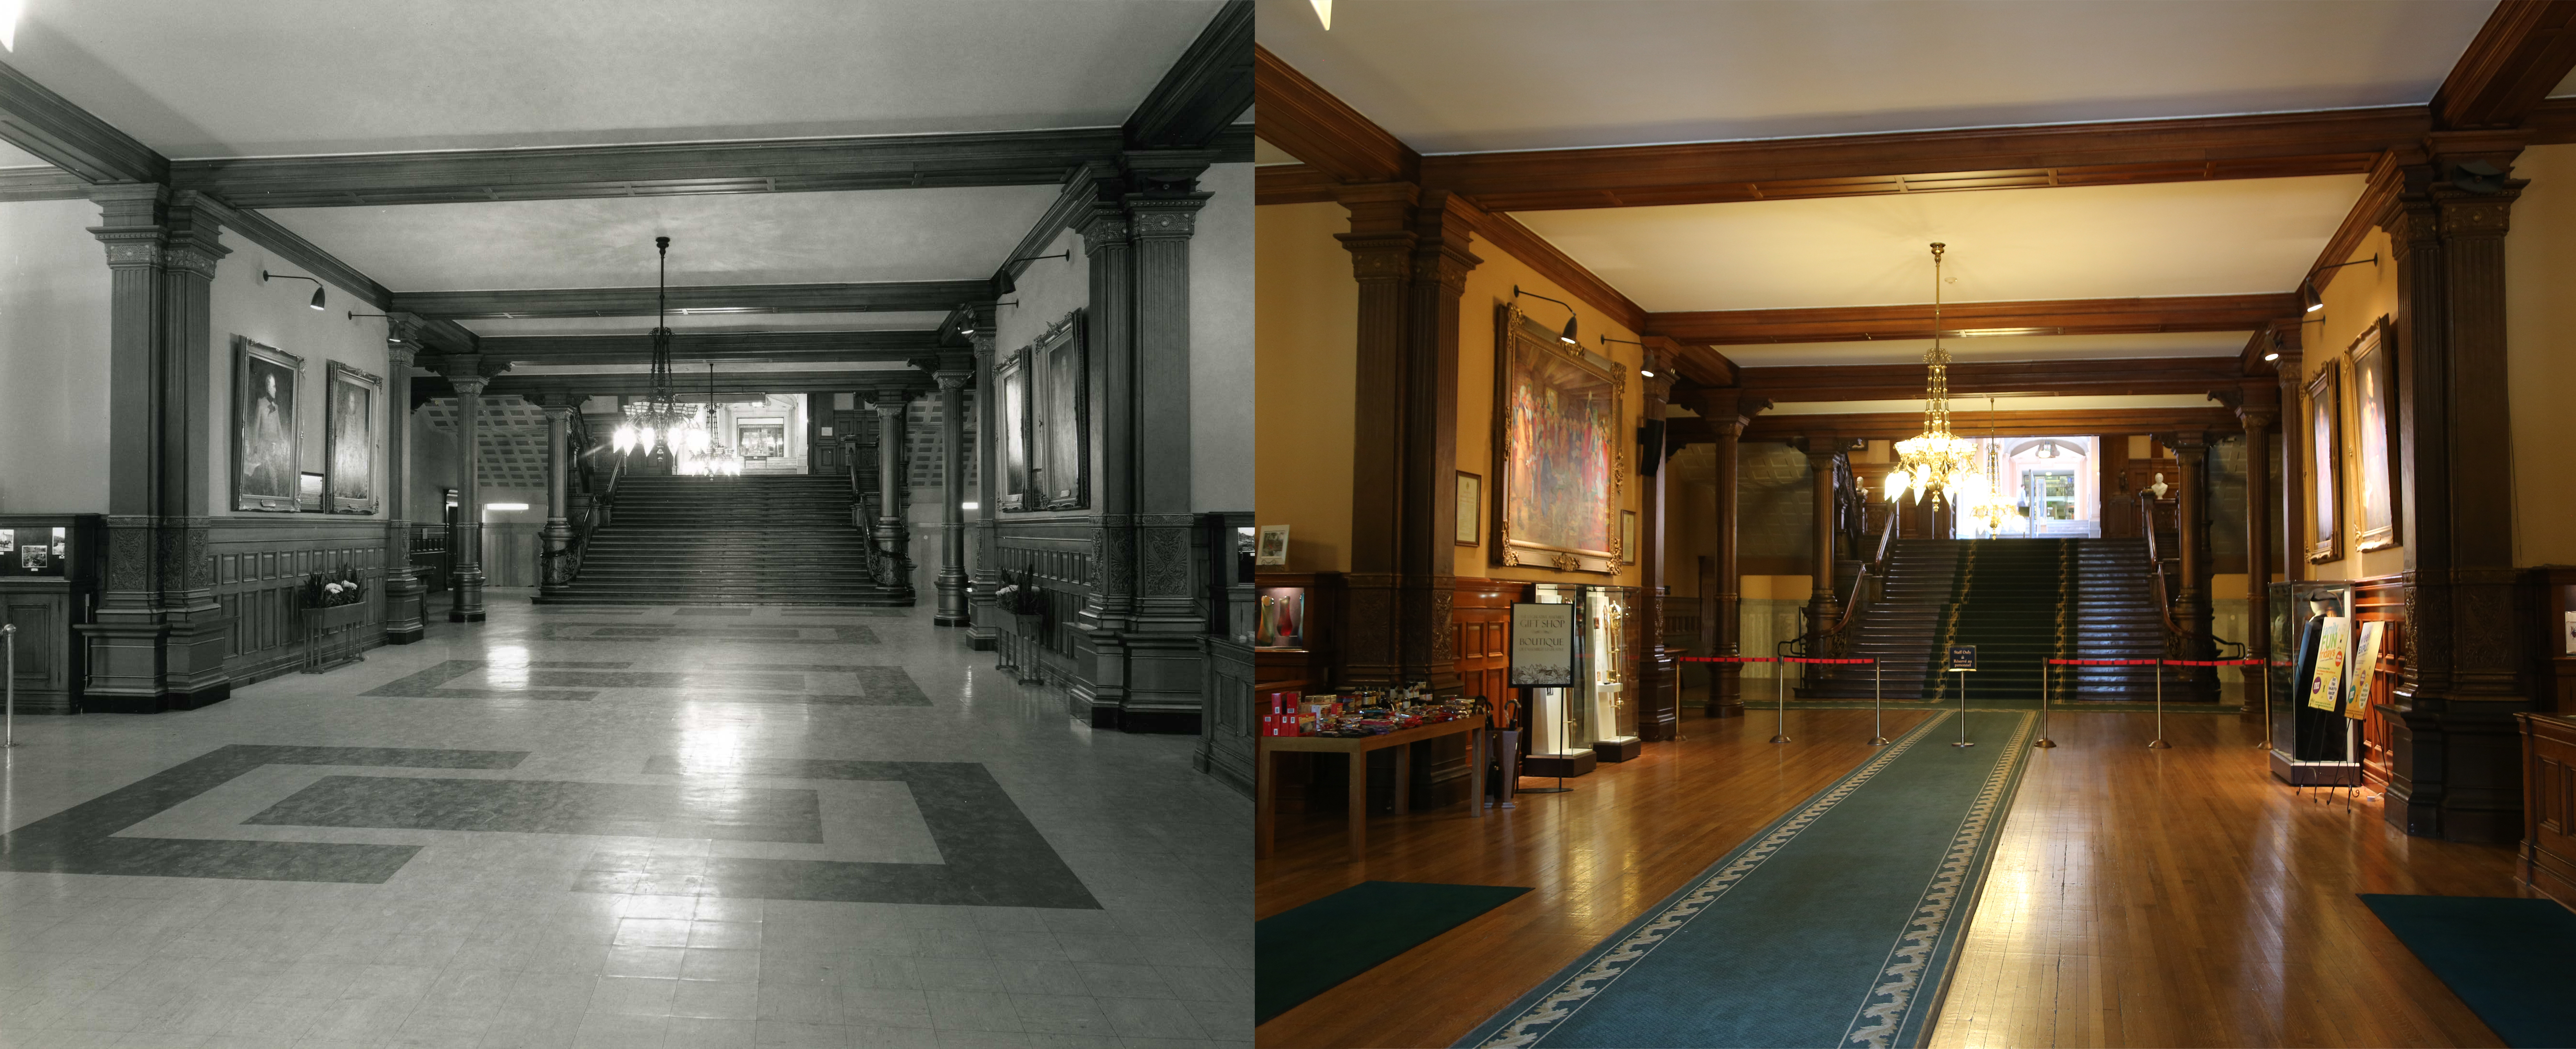 Picture showing a contrasting view of the Legislative Building lobby